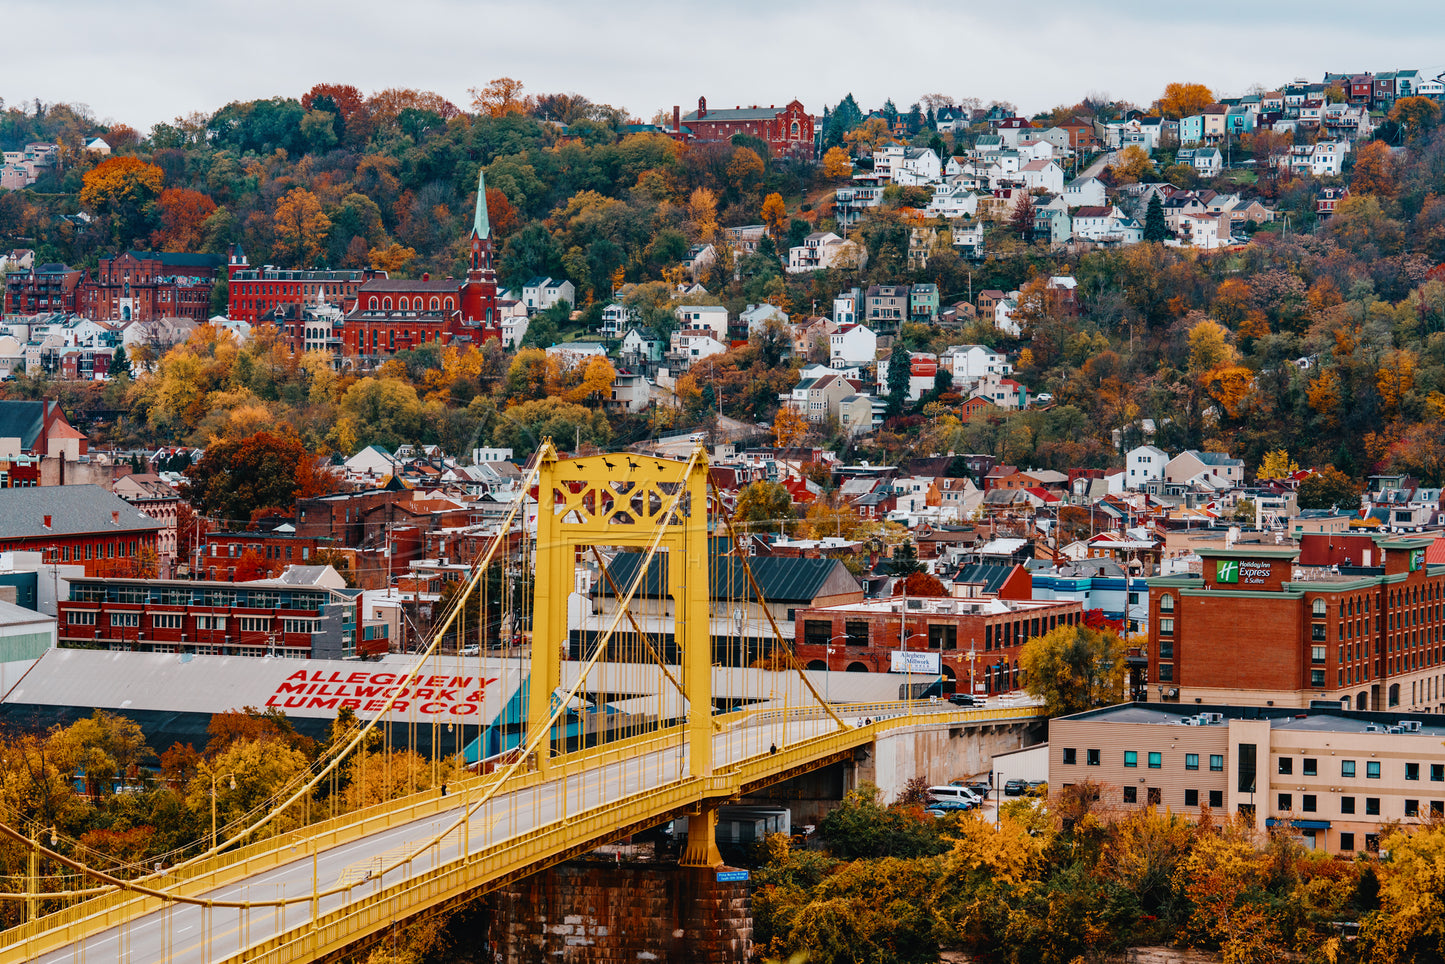 South Side Slopes and 10th Street Bridge in Fall